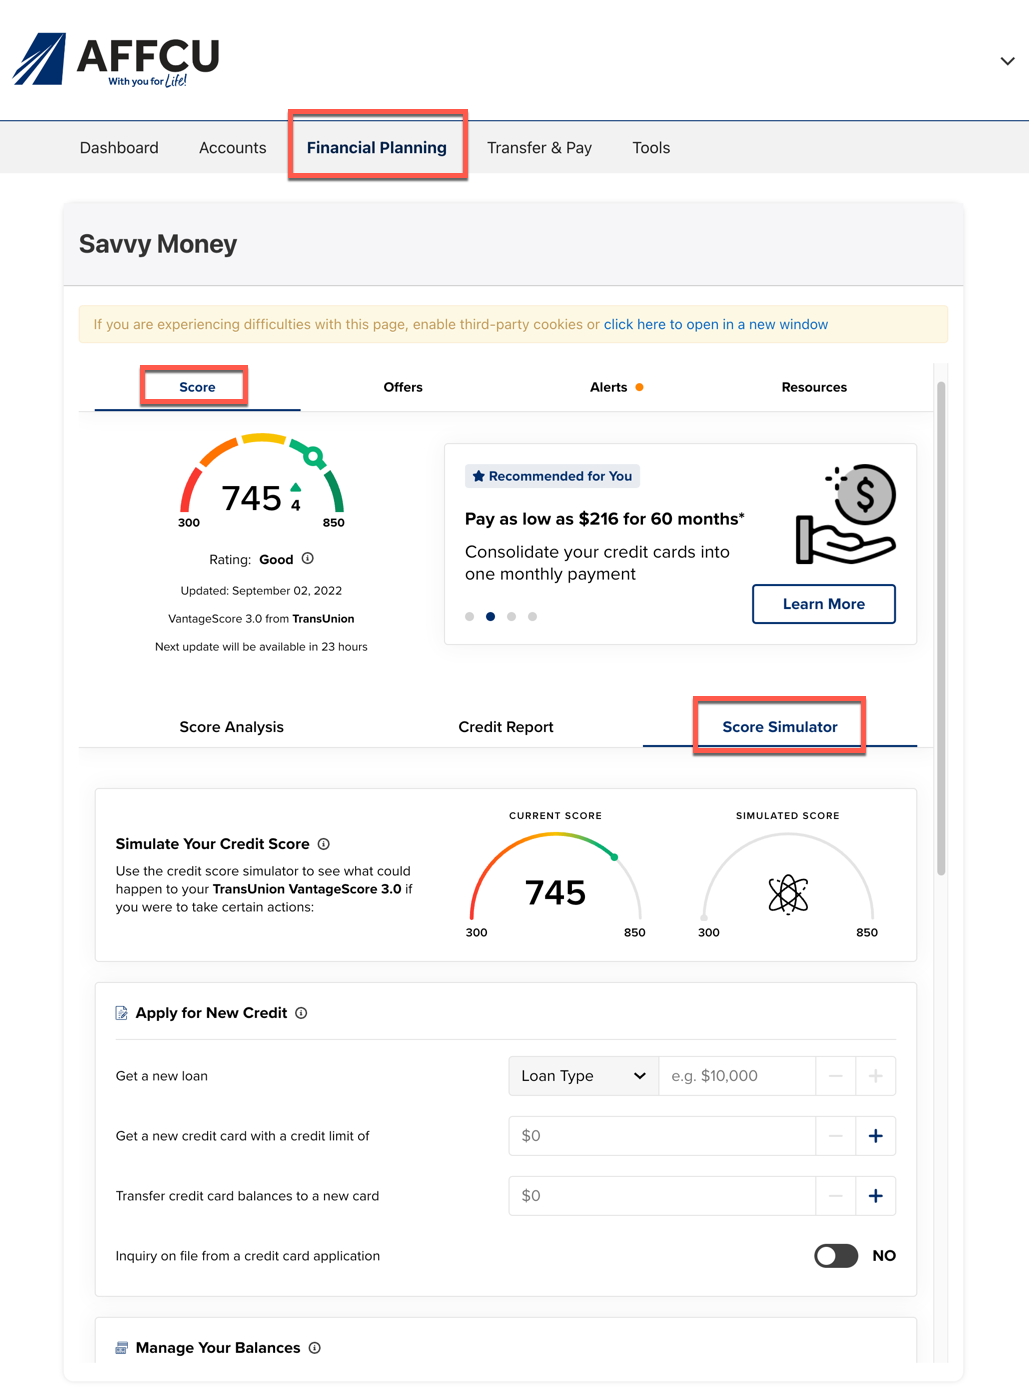 Image of the Simulator Tool in Credit Score by SavvyMoney